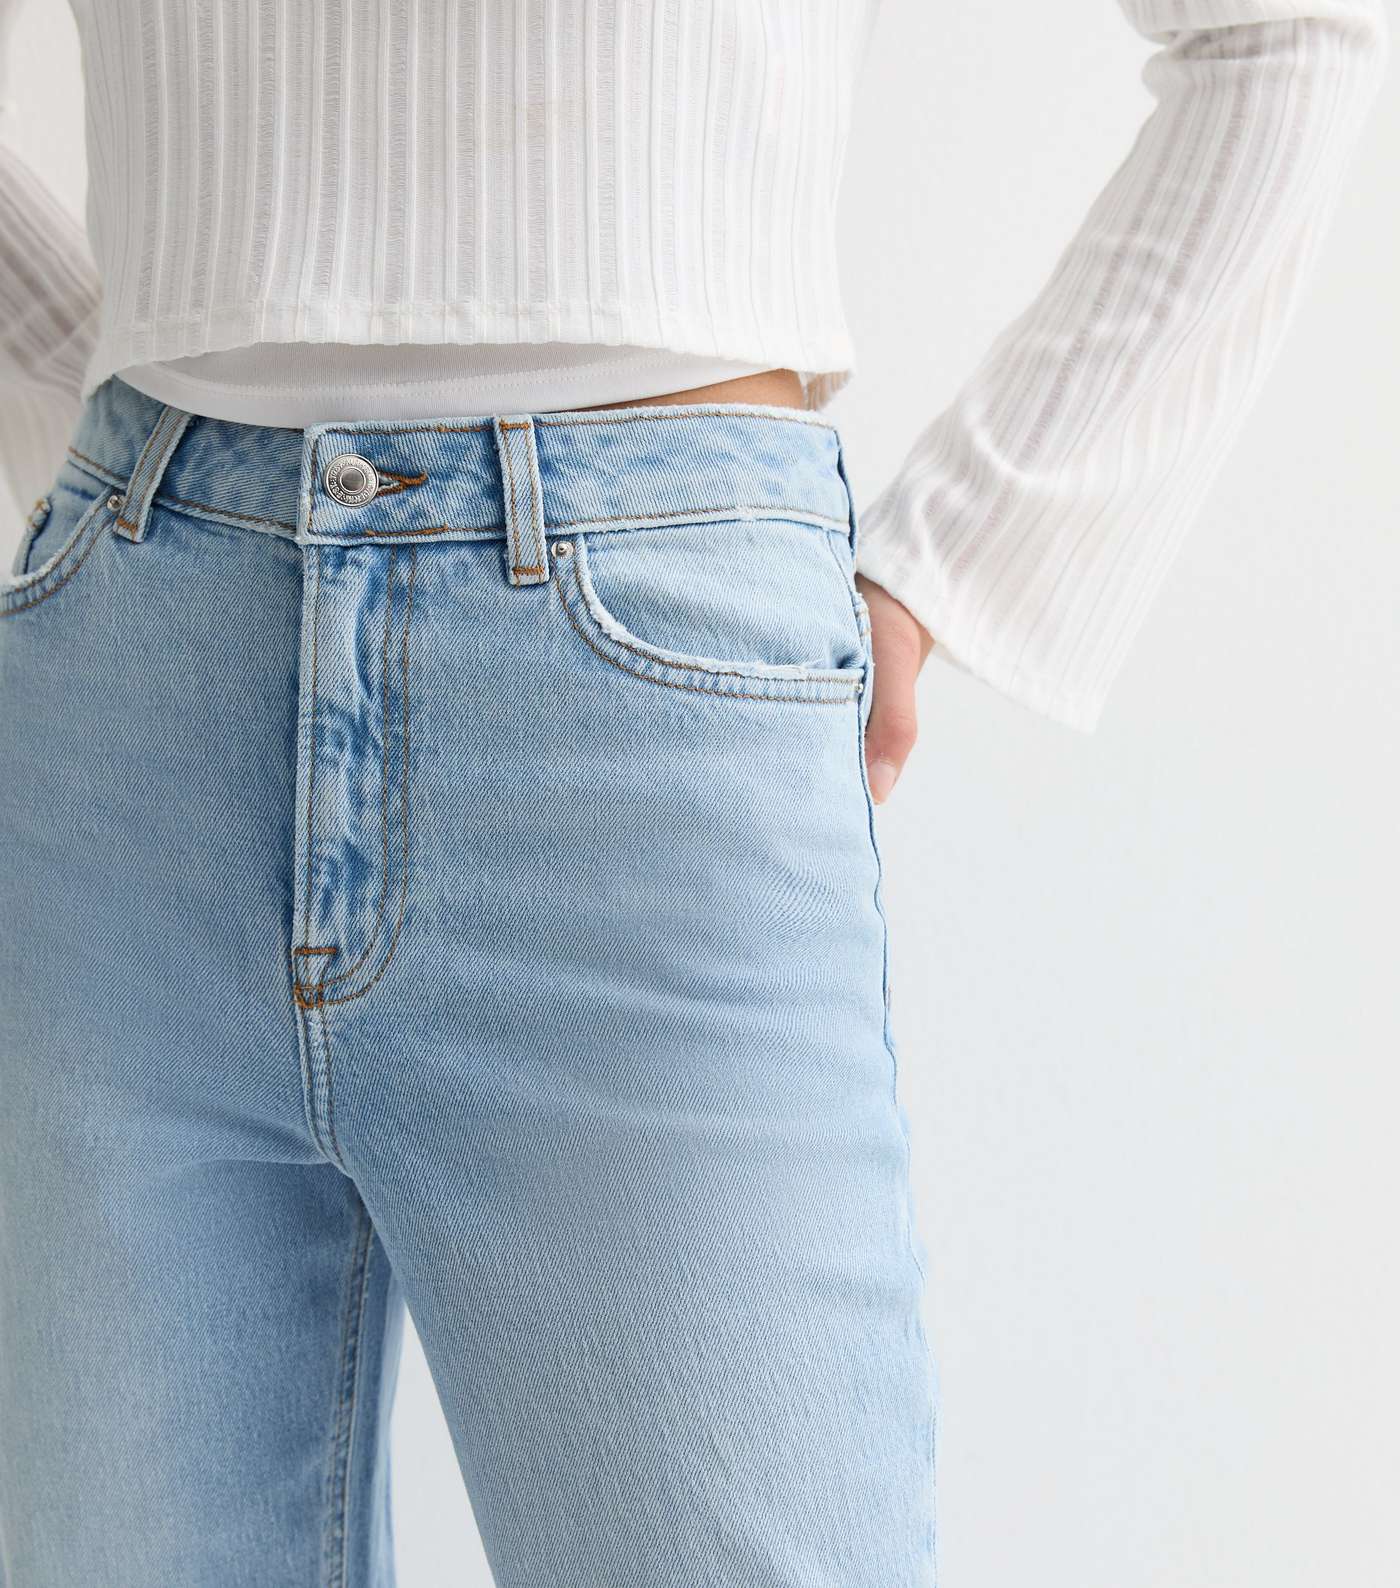 Girls Pale Blue High Waist Ripped Knee Mom Jeans Image 2